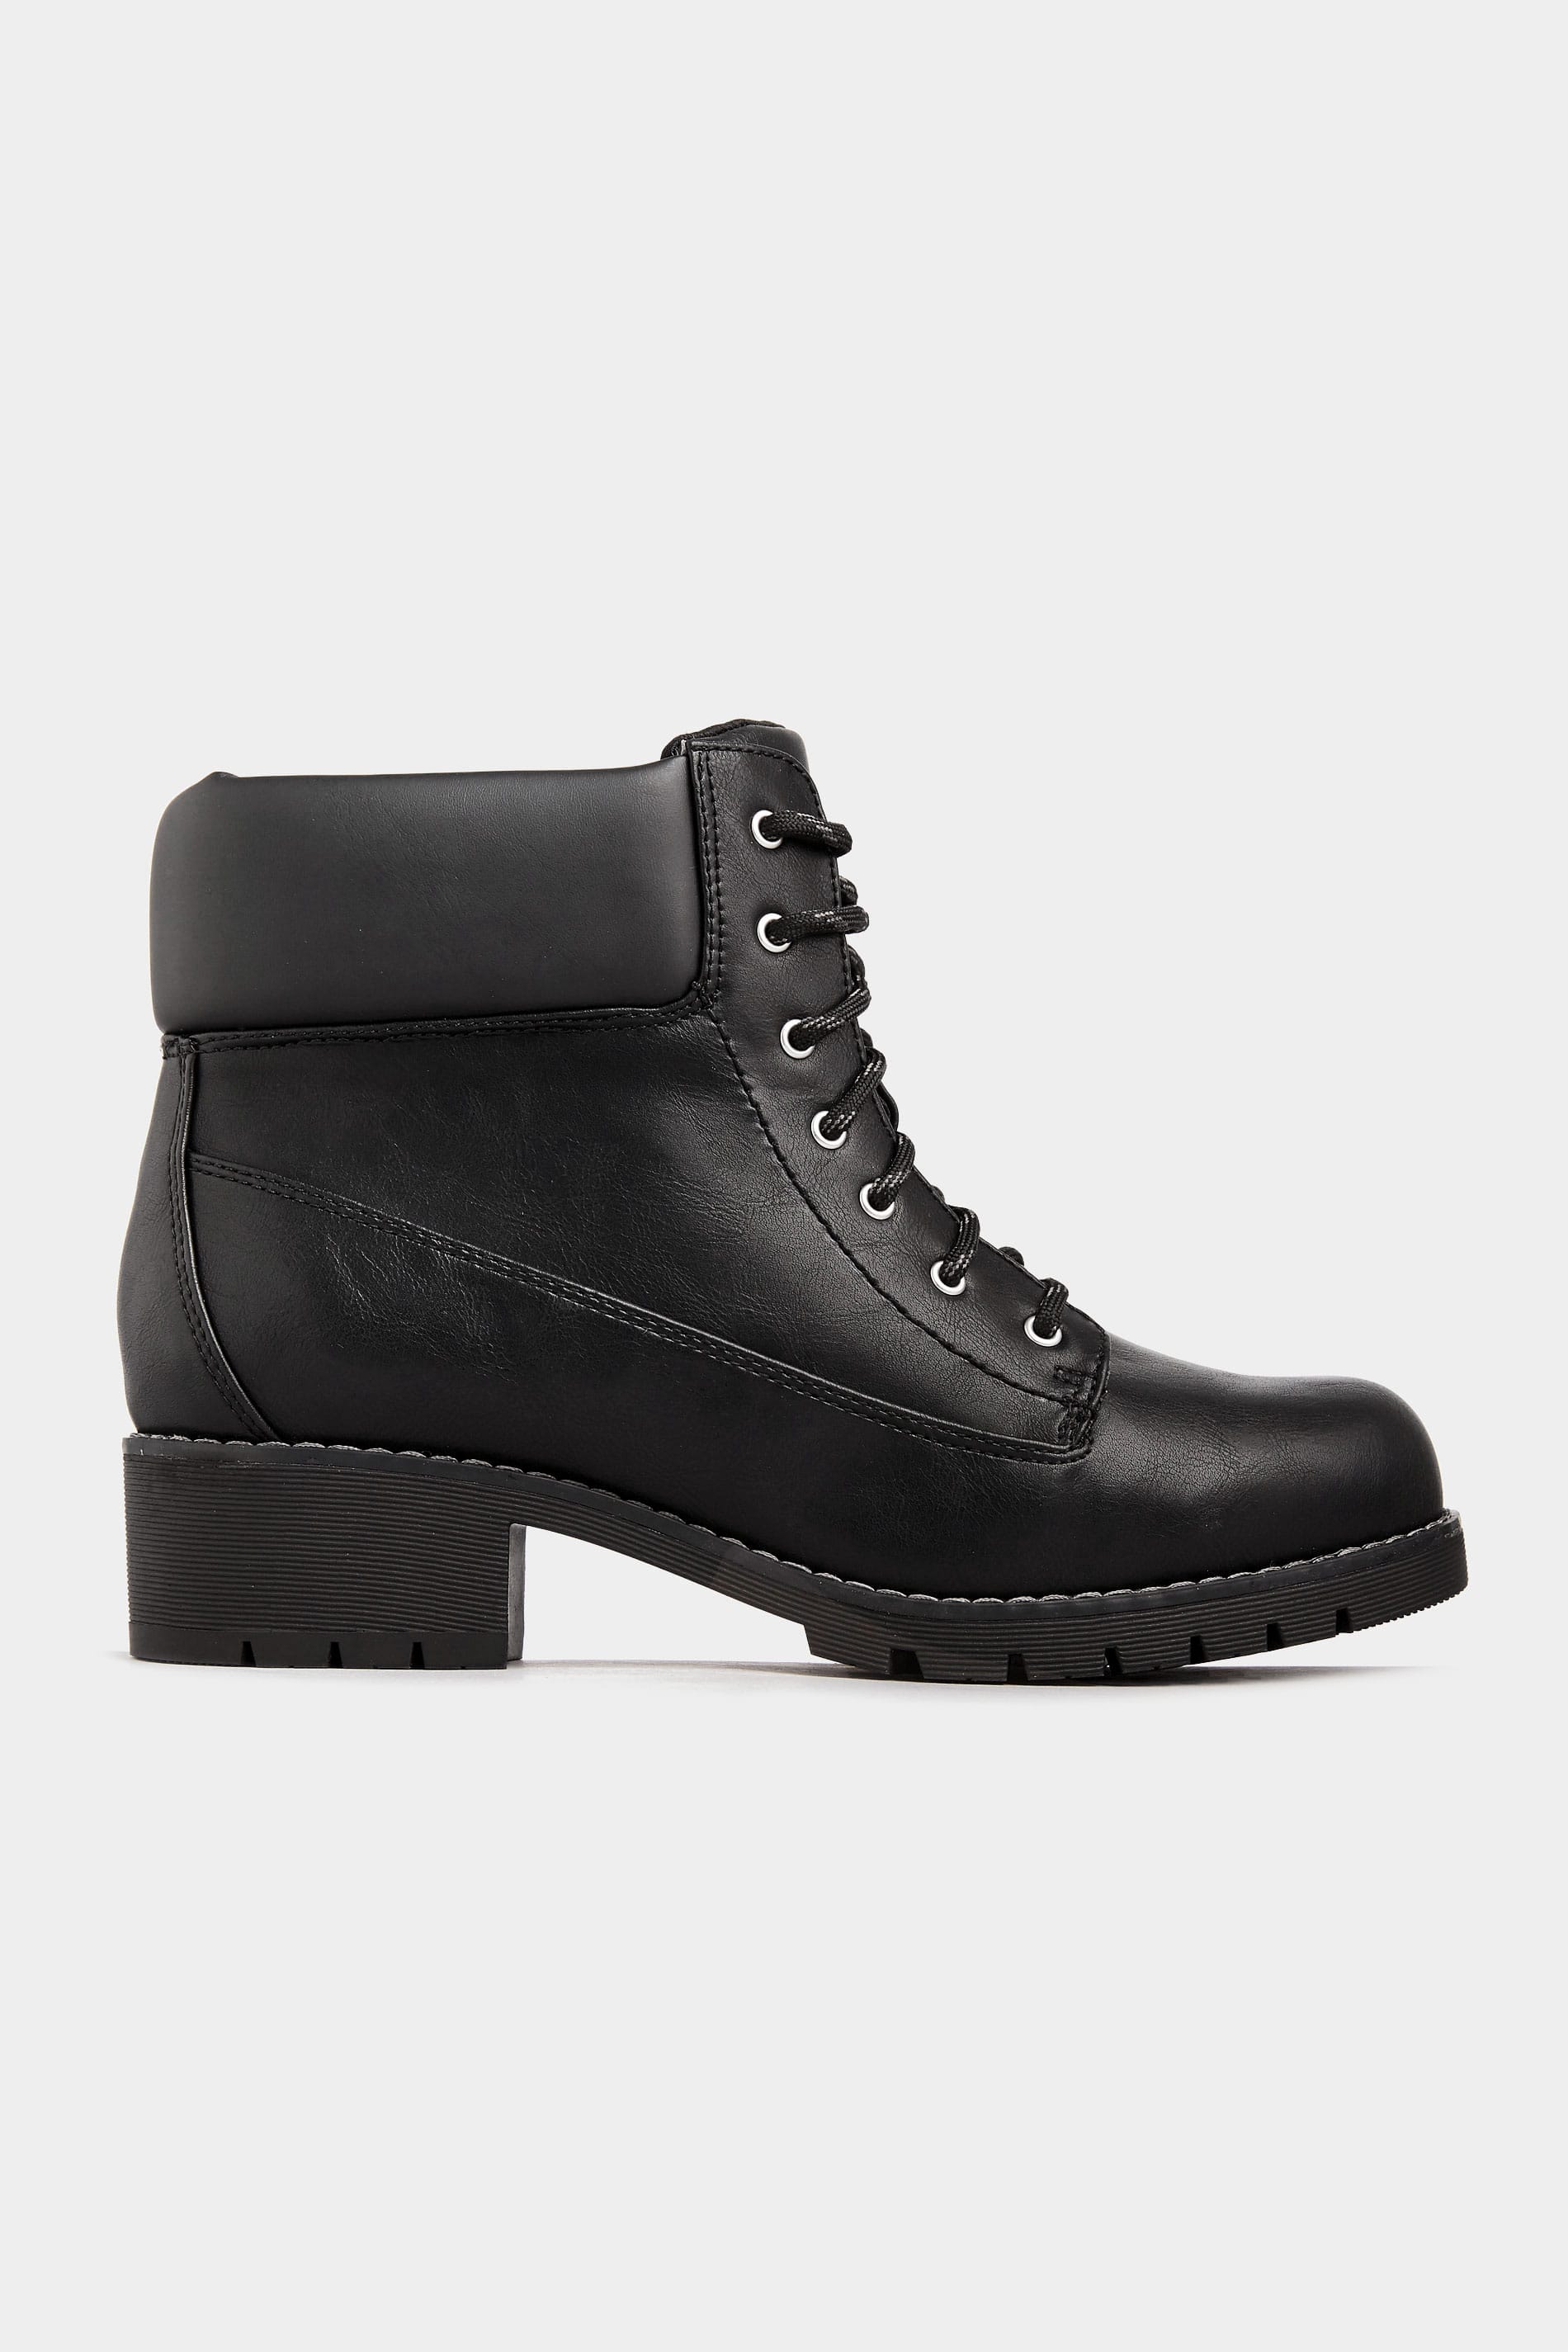 Black Combat Lace Up Ankle Boots In 